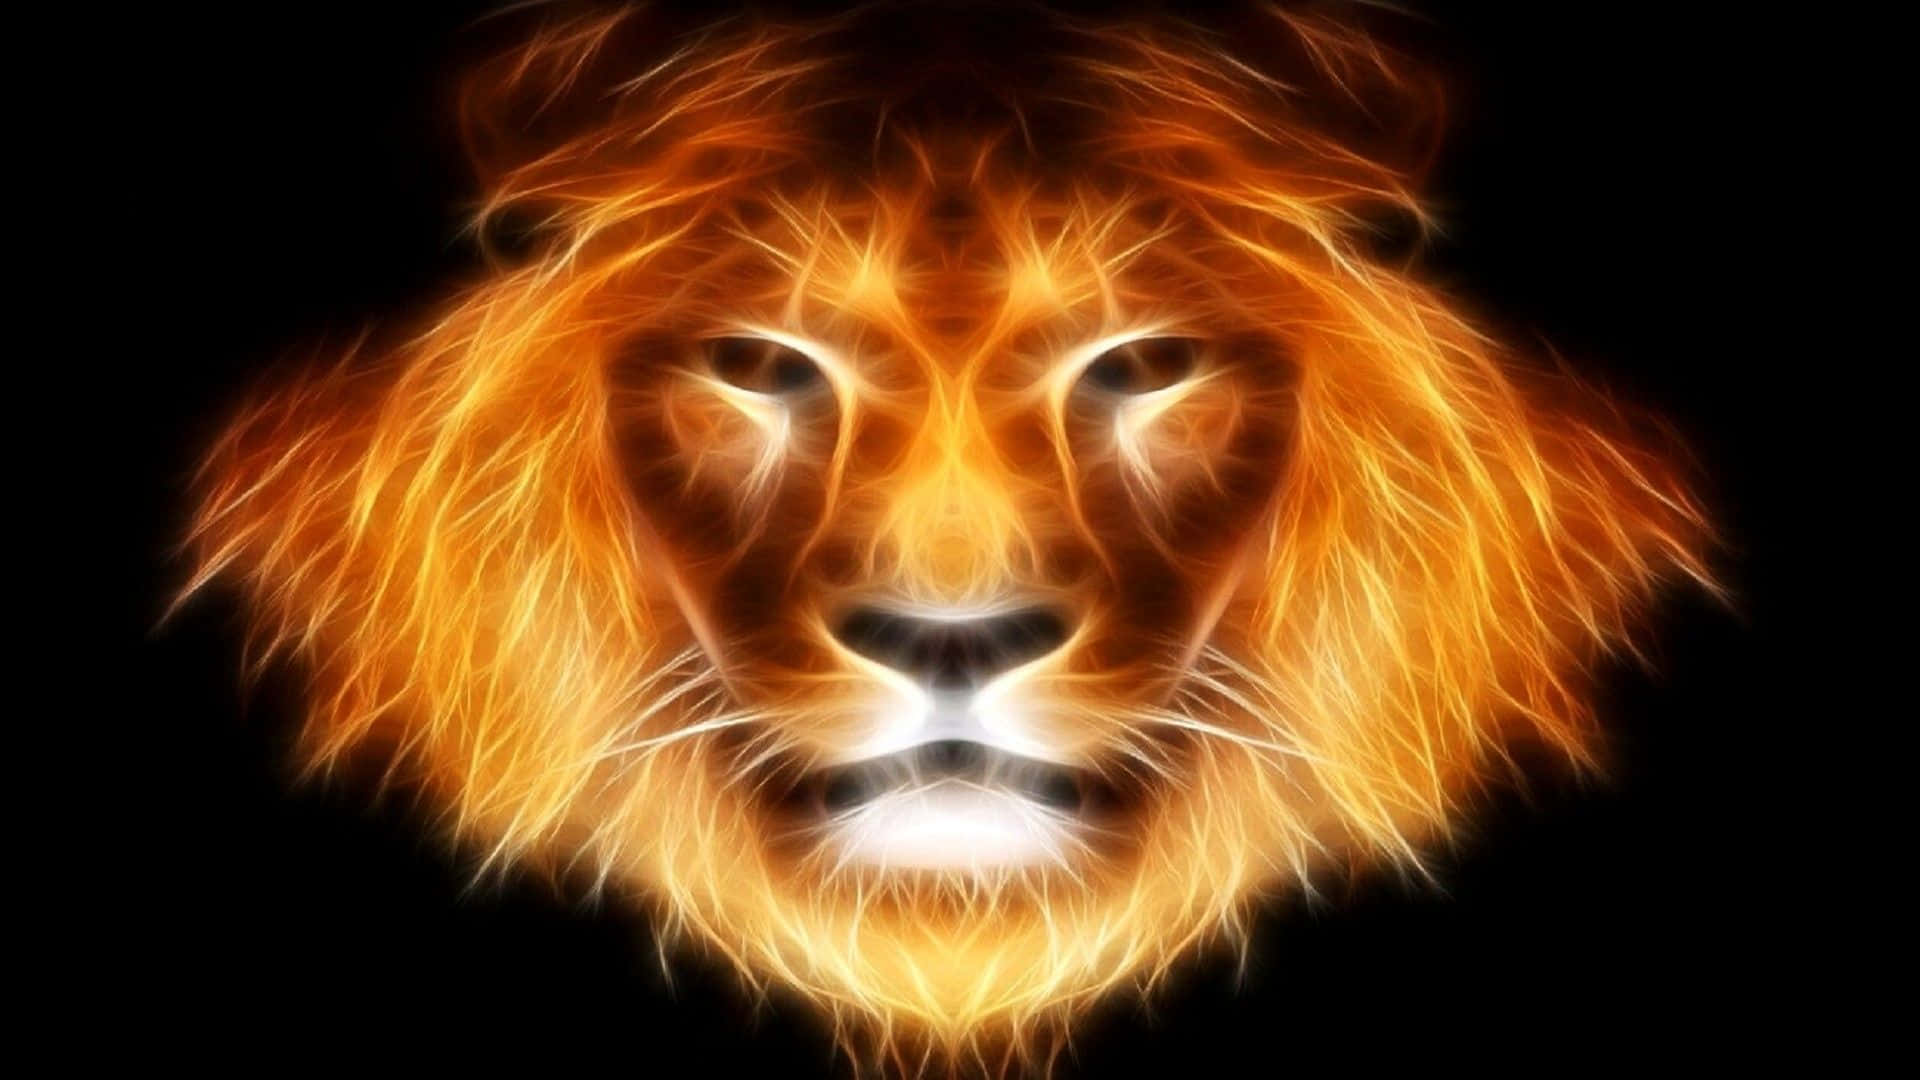 Roaring Lion in an Abstract Design Wallpaper